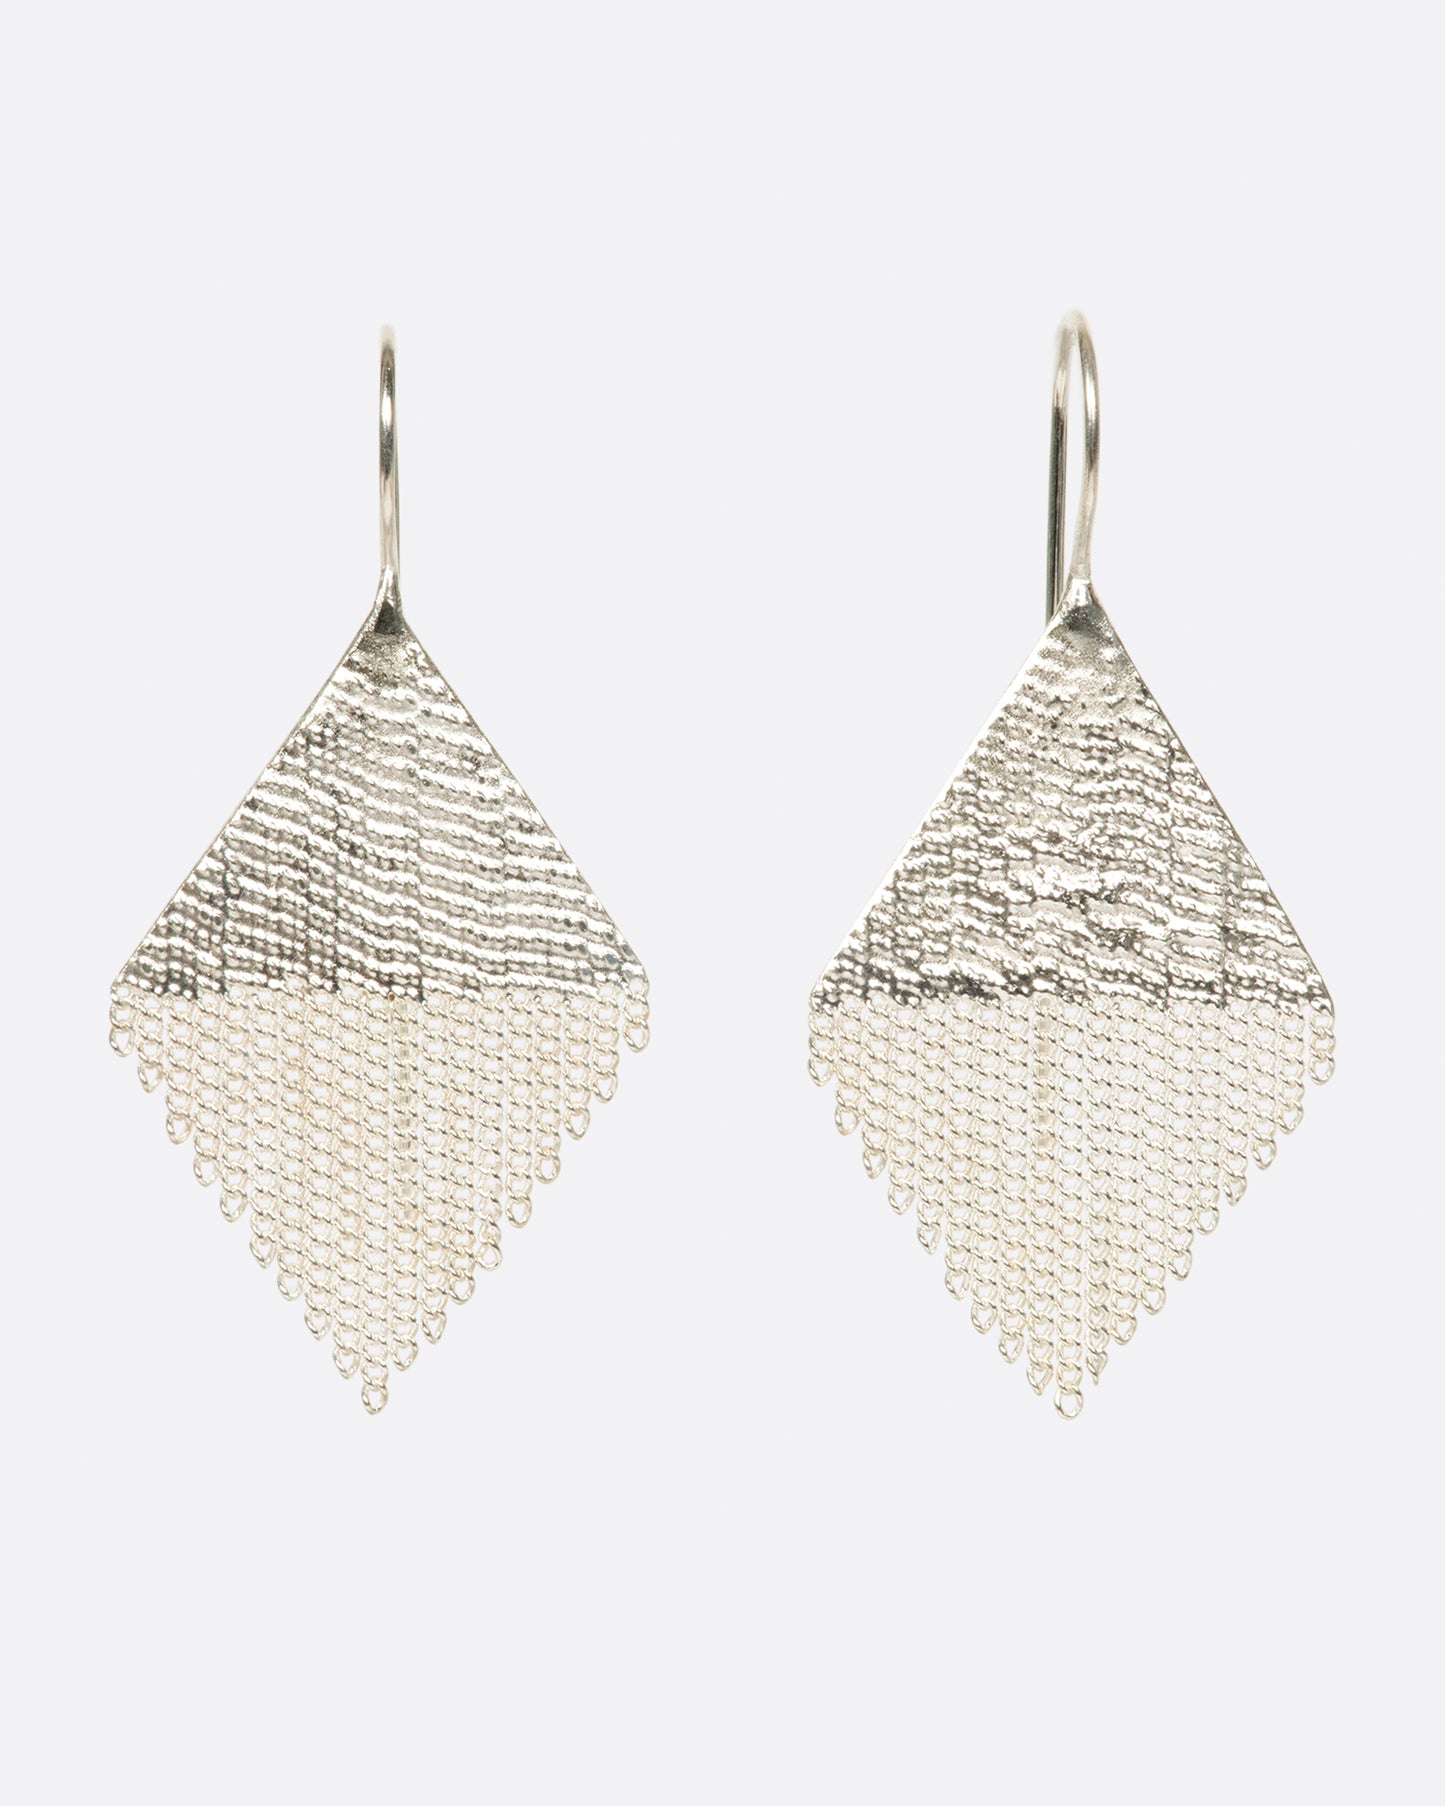 A pair of diamond shaped drop earrings made from sterling silver chains and silver solder.